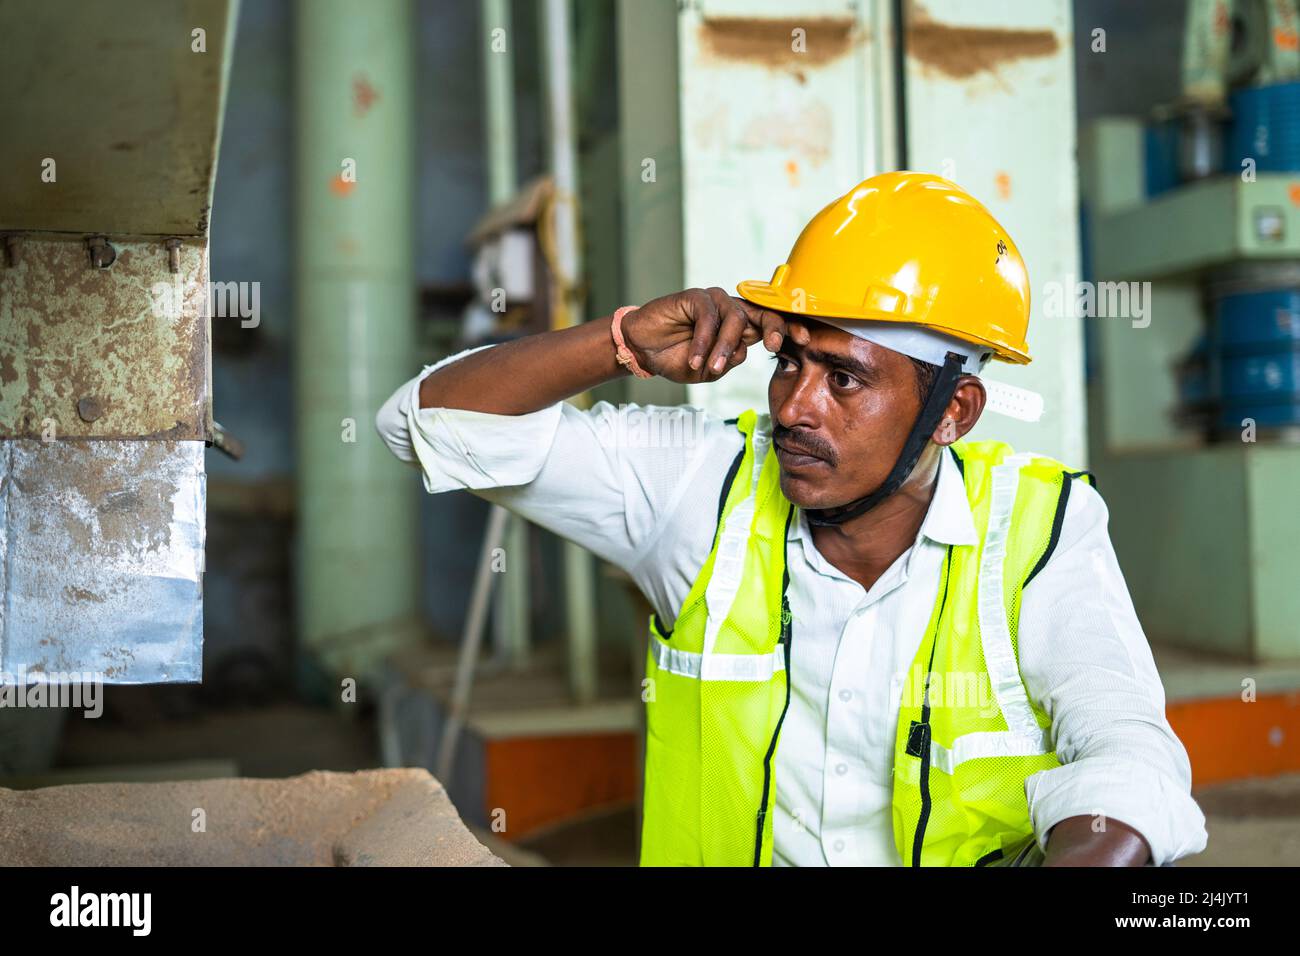 Industrial worker busy working in front of machine - concept of manual labour, hardworking and blue collar jobs Stock Photo